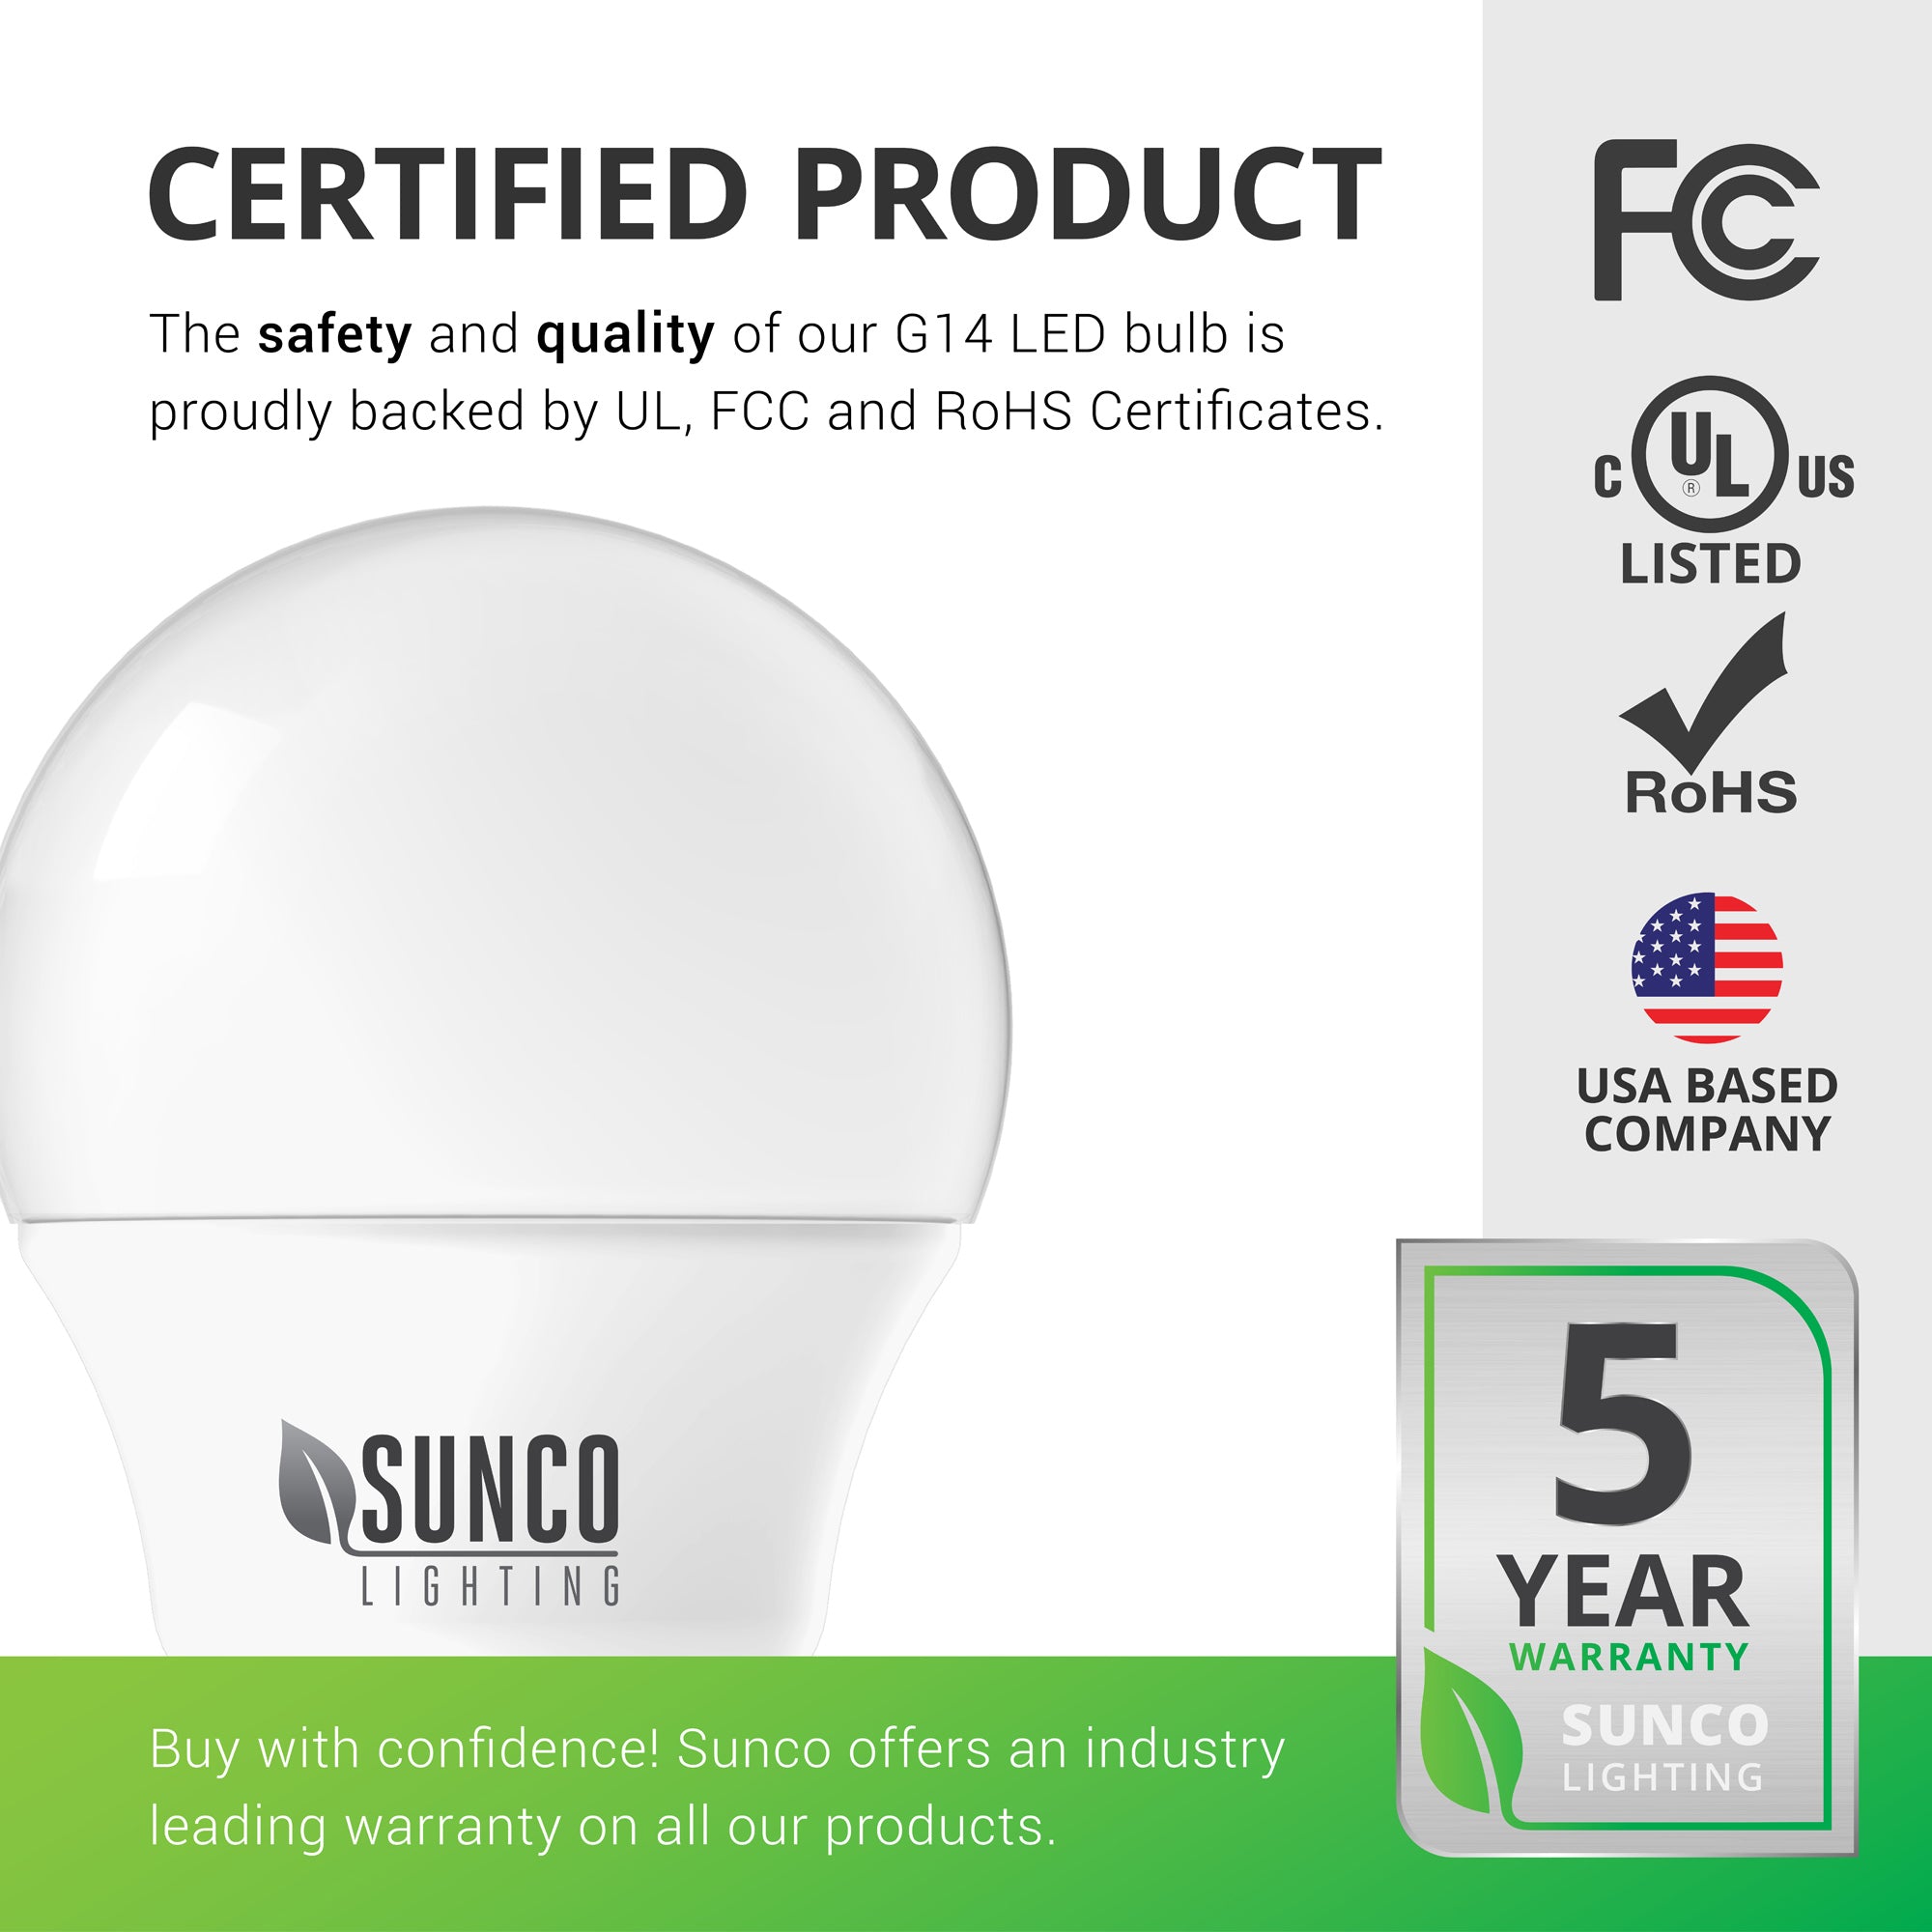 This light bulb is a certified product. Sunco G14 LED Bulbs are backed by RoHS, FCC, and UL certificates. That helps consumers like you buy with confidence that these lights live up to set standards. Sunco also offers an industry leading warranty on all our products. This G14 LED light bulb is backed by a 5-year warranty. Sunco is based in the USA. We are American owned and operated.